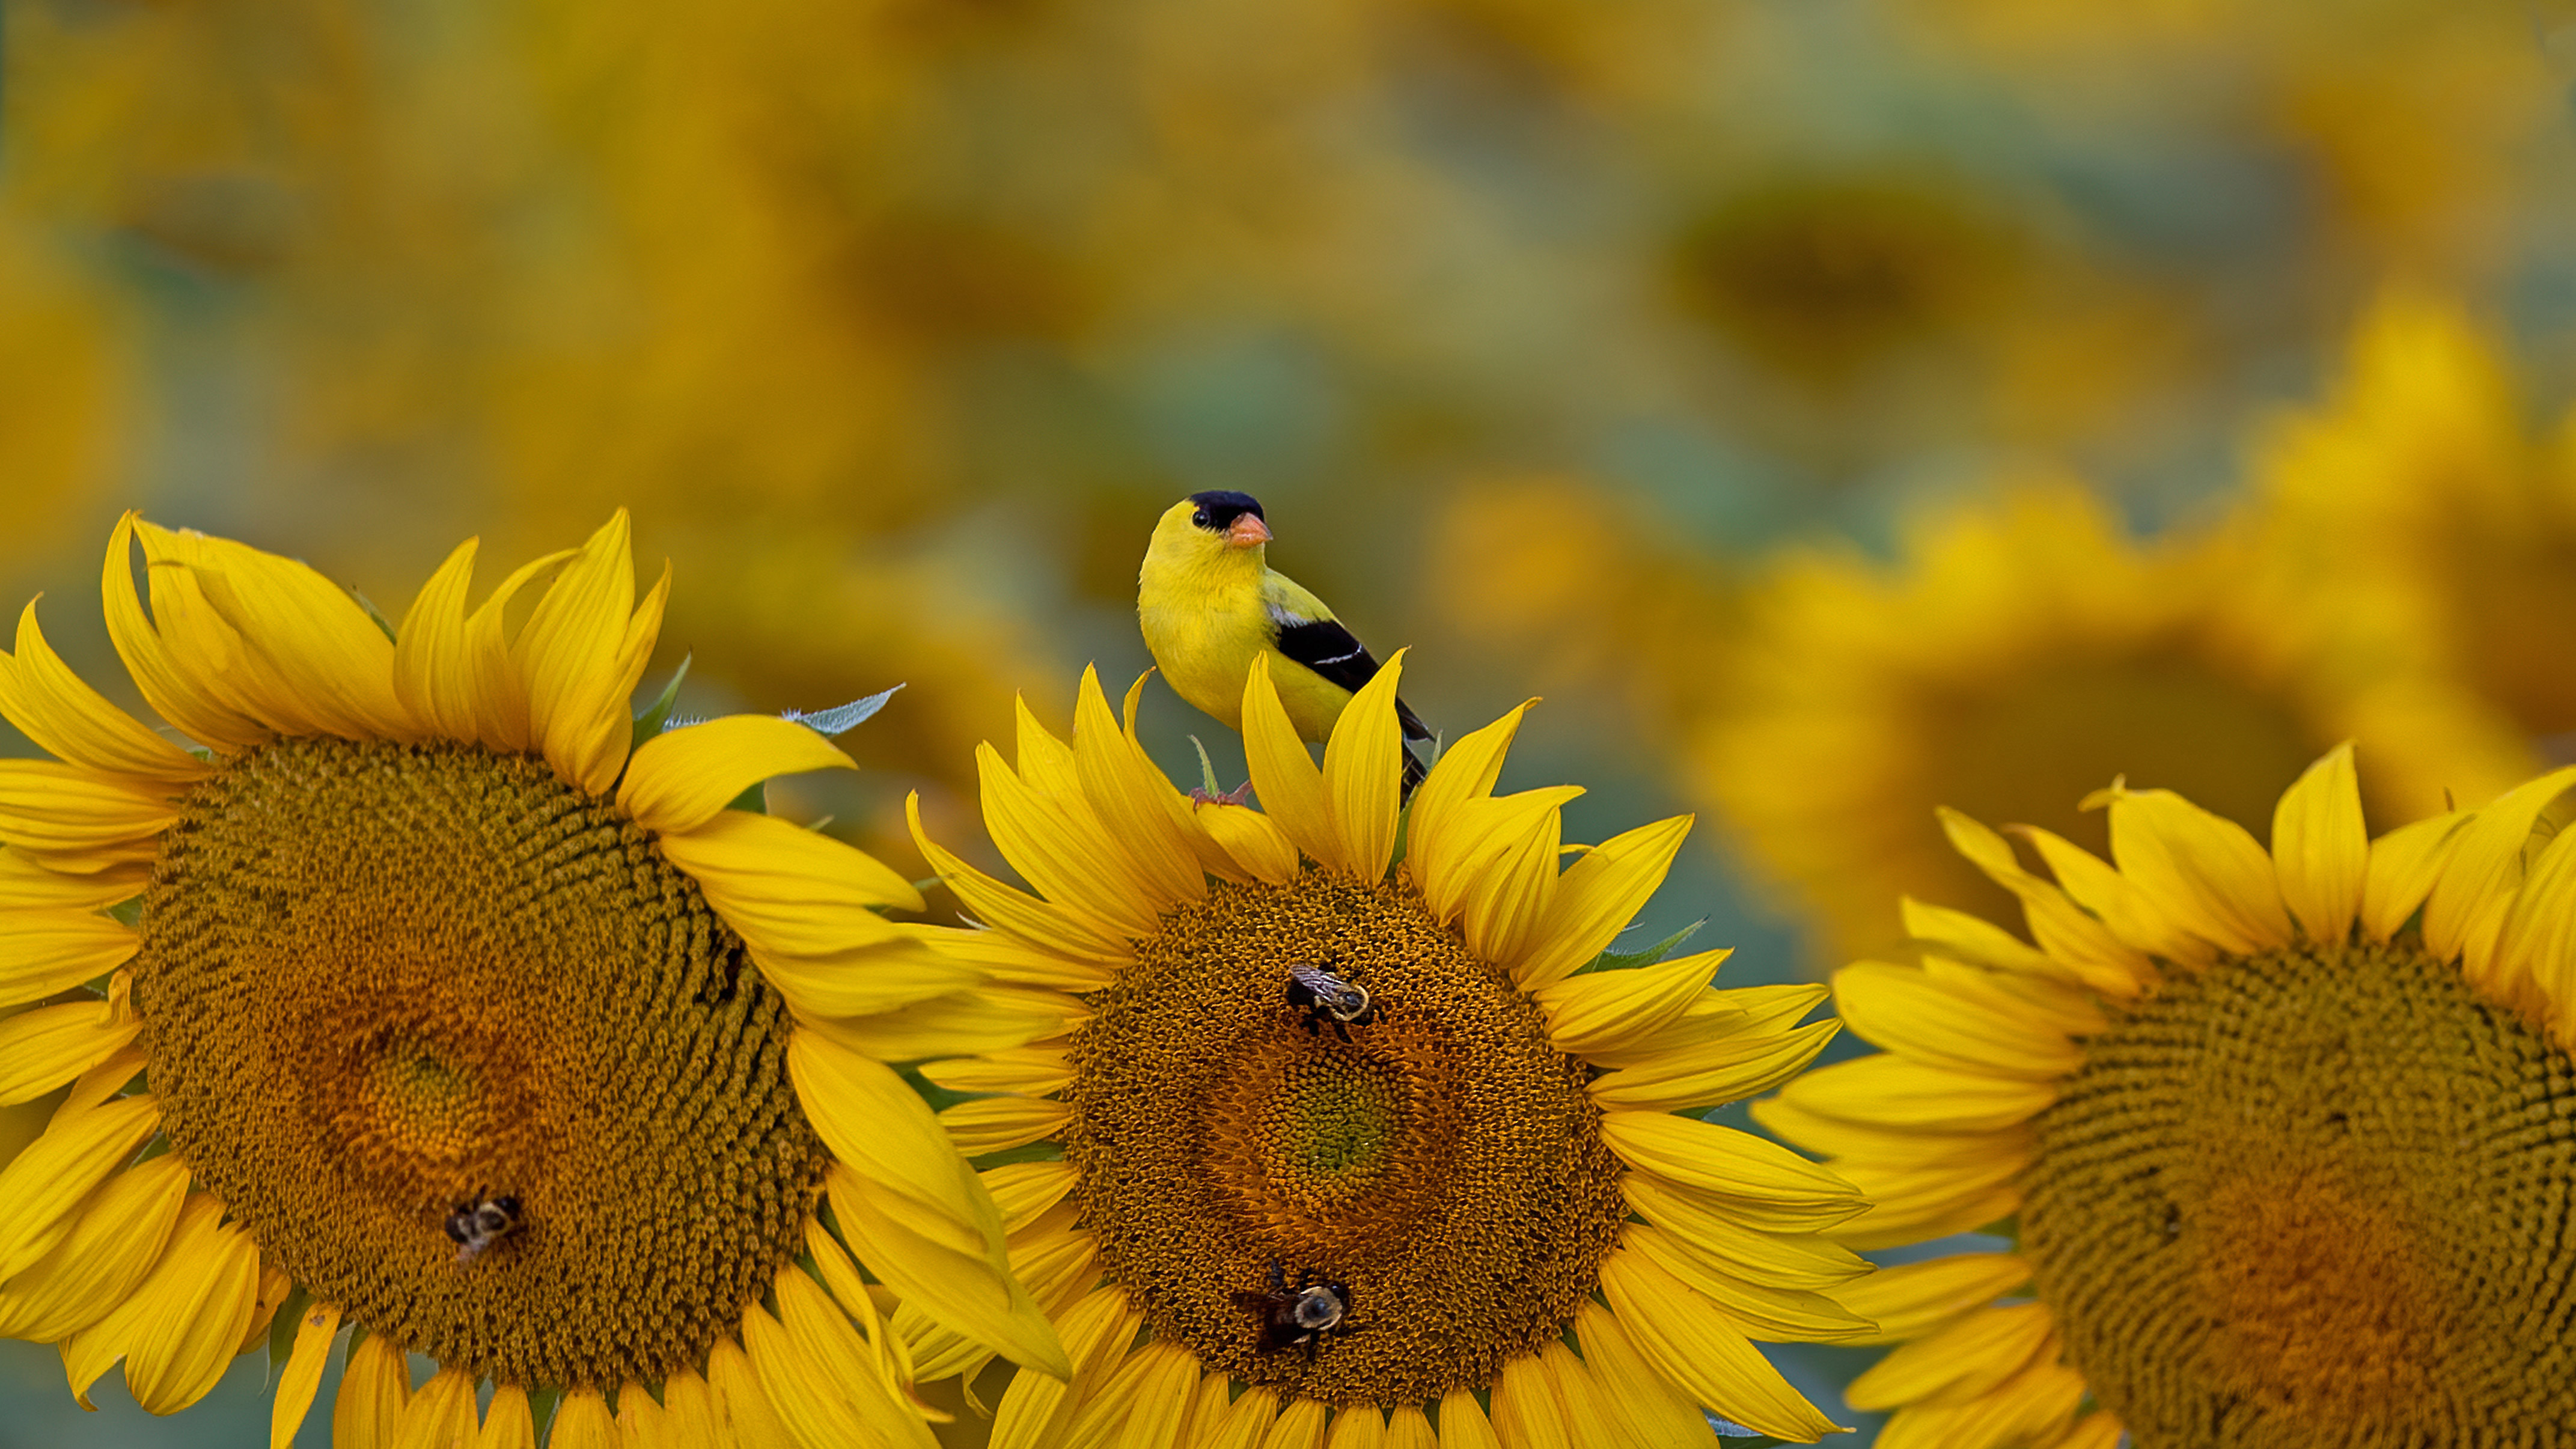 American Goldfinch on a sunflower in McConnells, South Carolina by Teresa Kopec